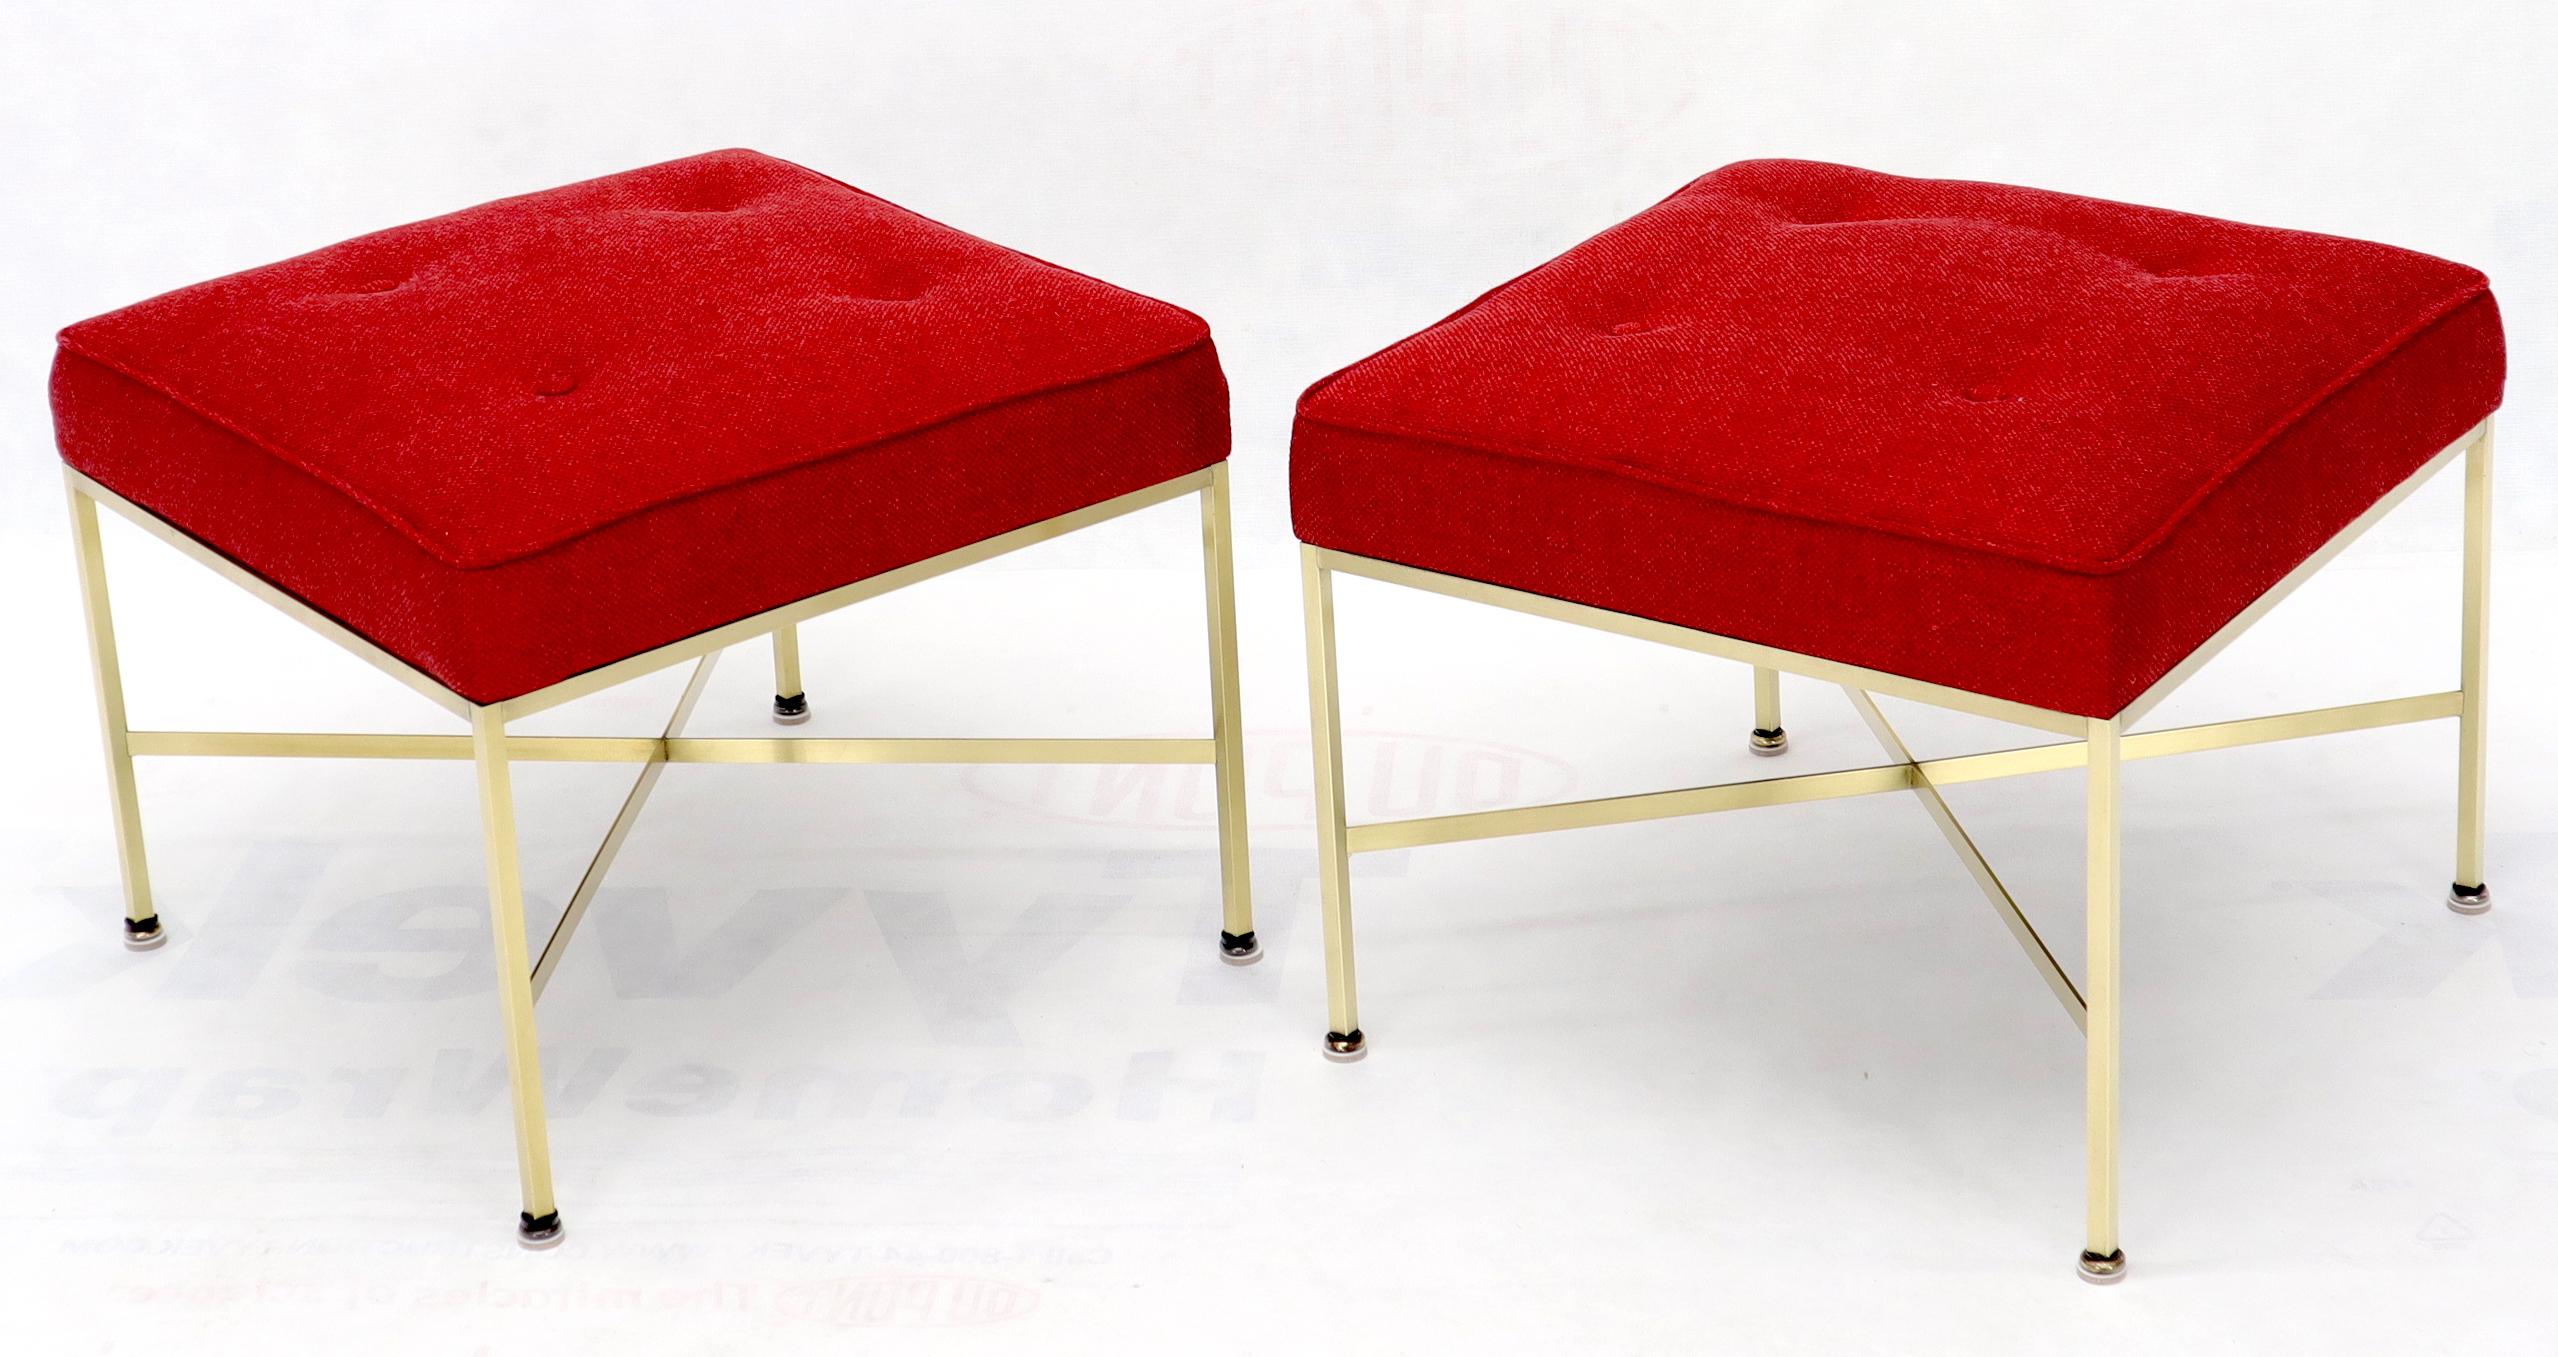 Mid-Century Modern Pair of New Red Upholstery Square Brass Frames Benches Stools by Paul McCobb For Sale